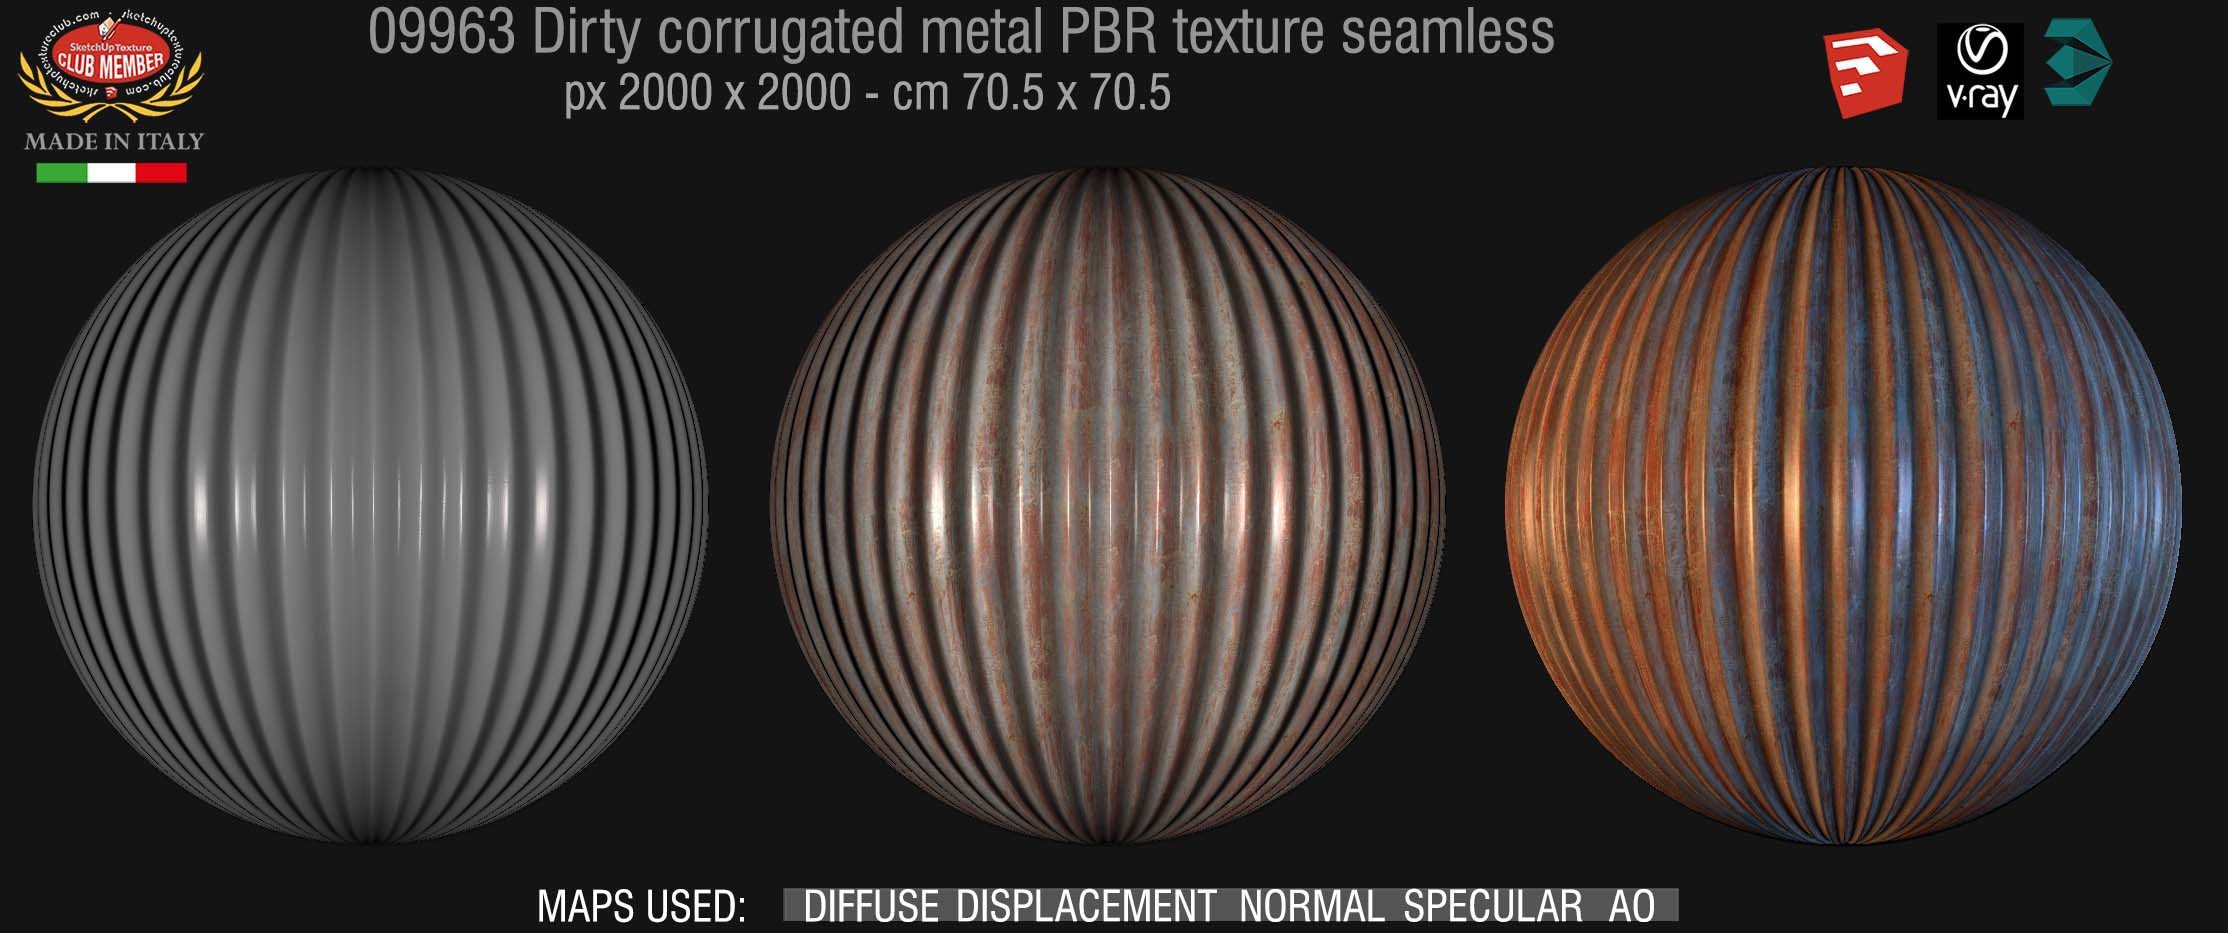 09963 Dirty corrugated metal PBR texture seamless DEMO